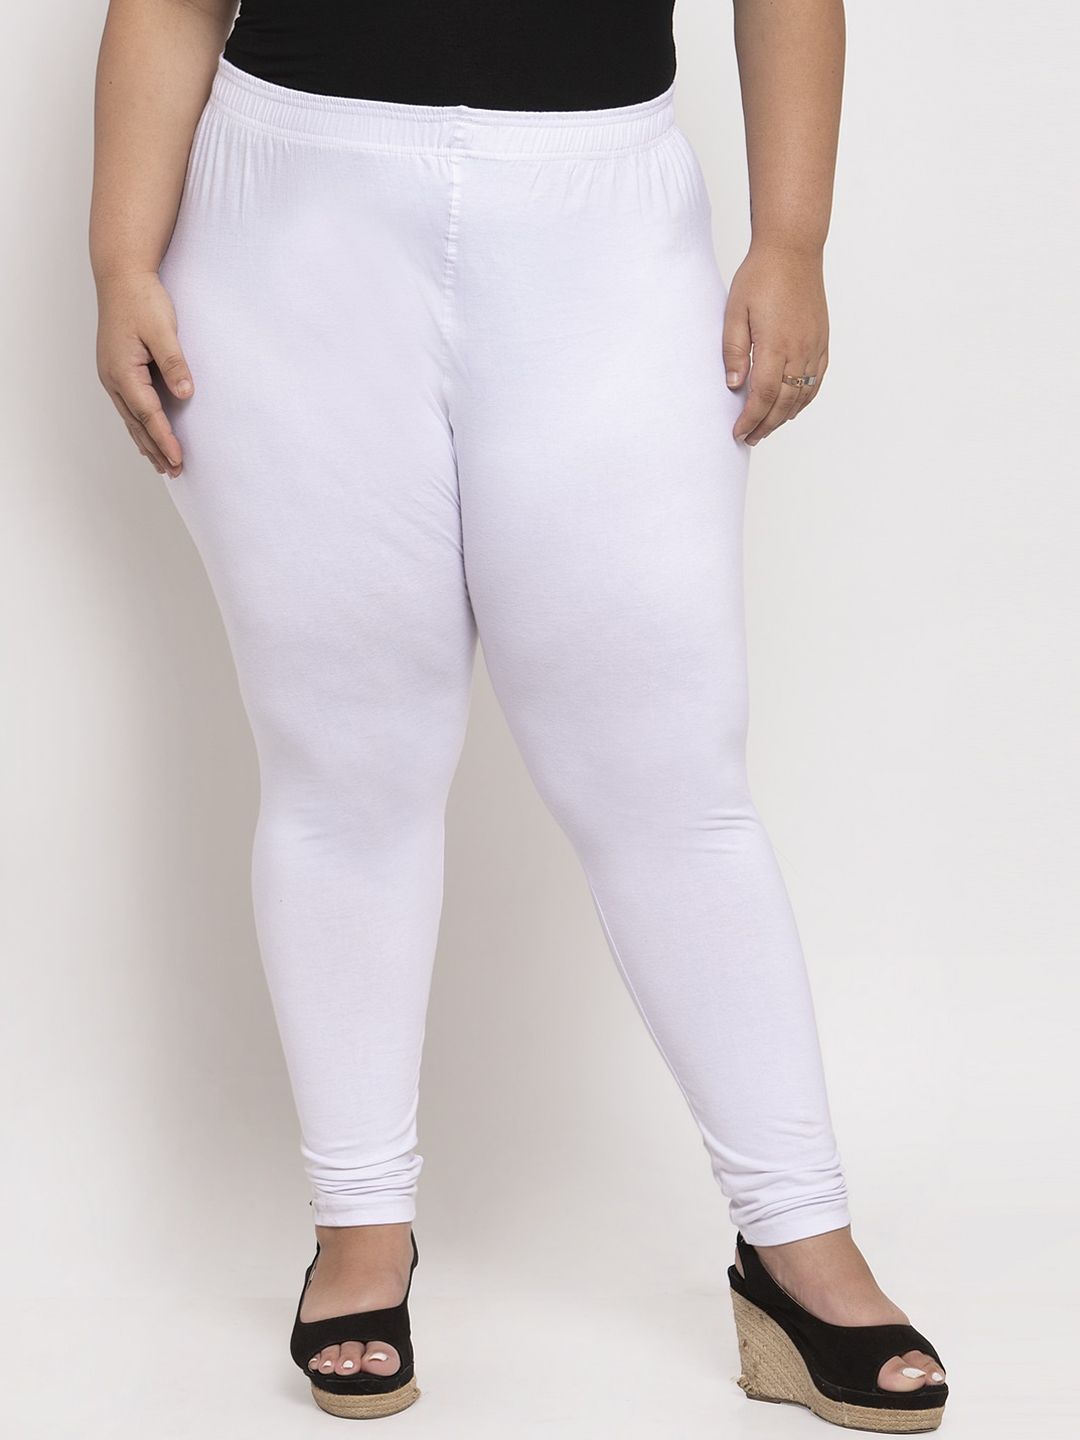 TAG 7 PLUS Women White Solid Plus Size Ankle-Length Leggings Price in India